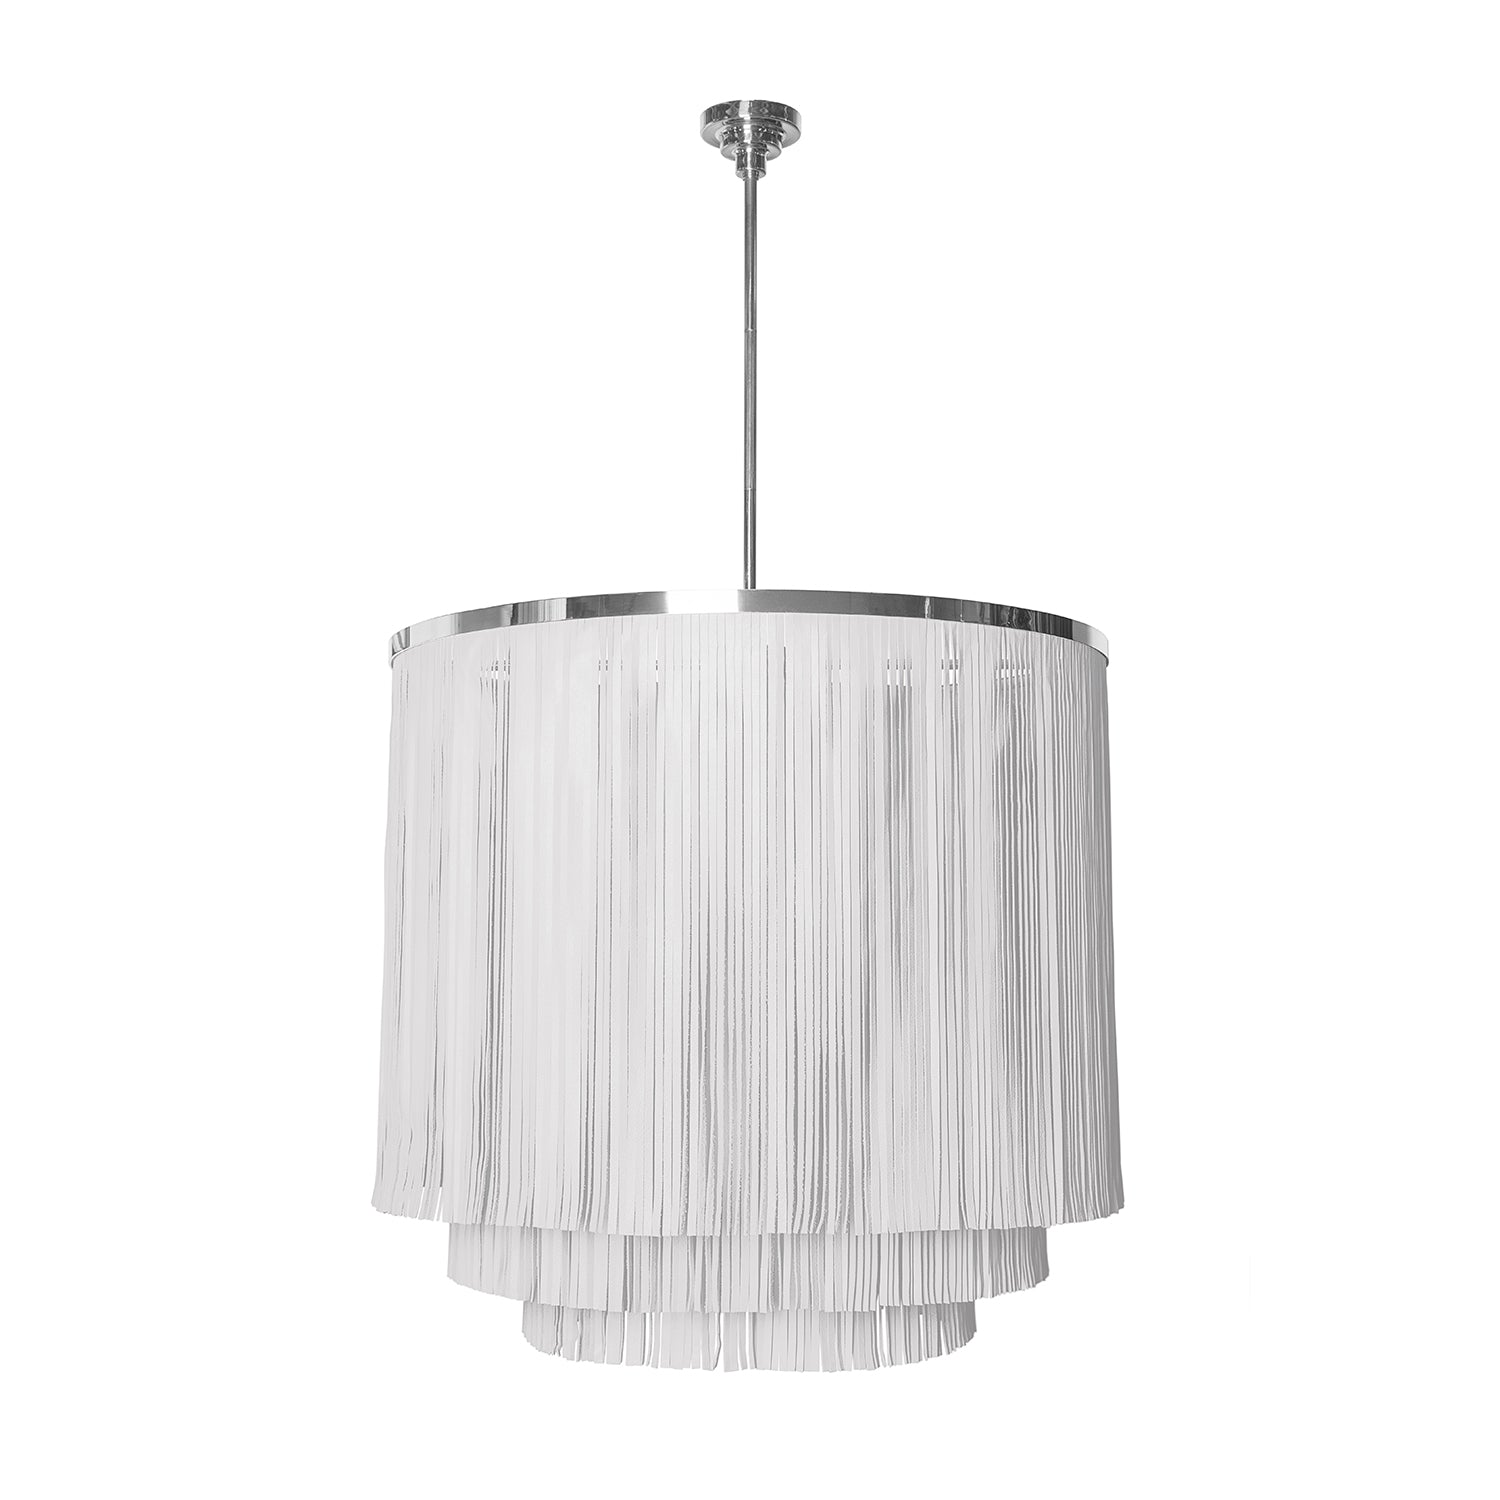 Large NeKeia Leather Chandelier in Nickel Finish and Premium Leather